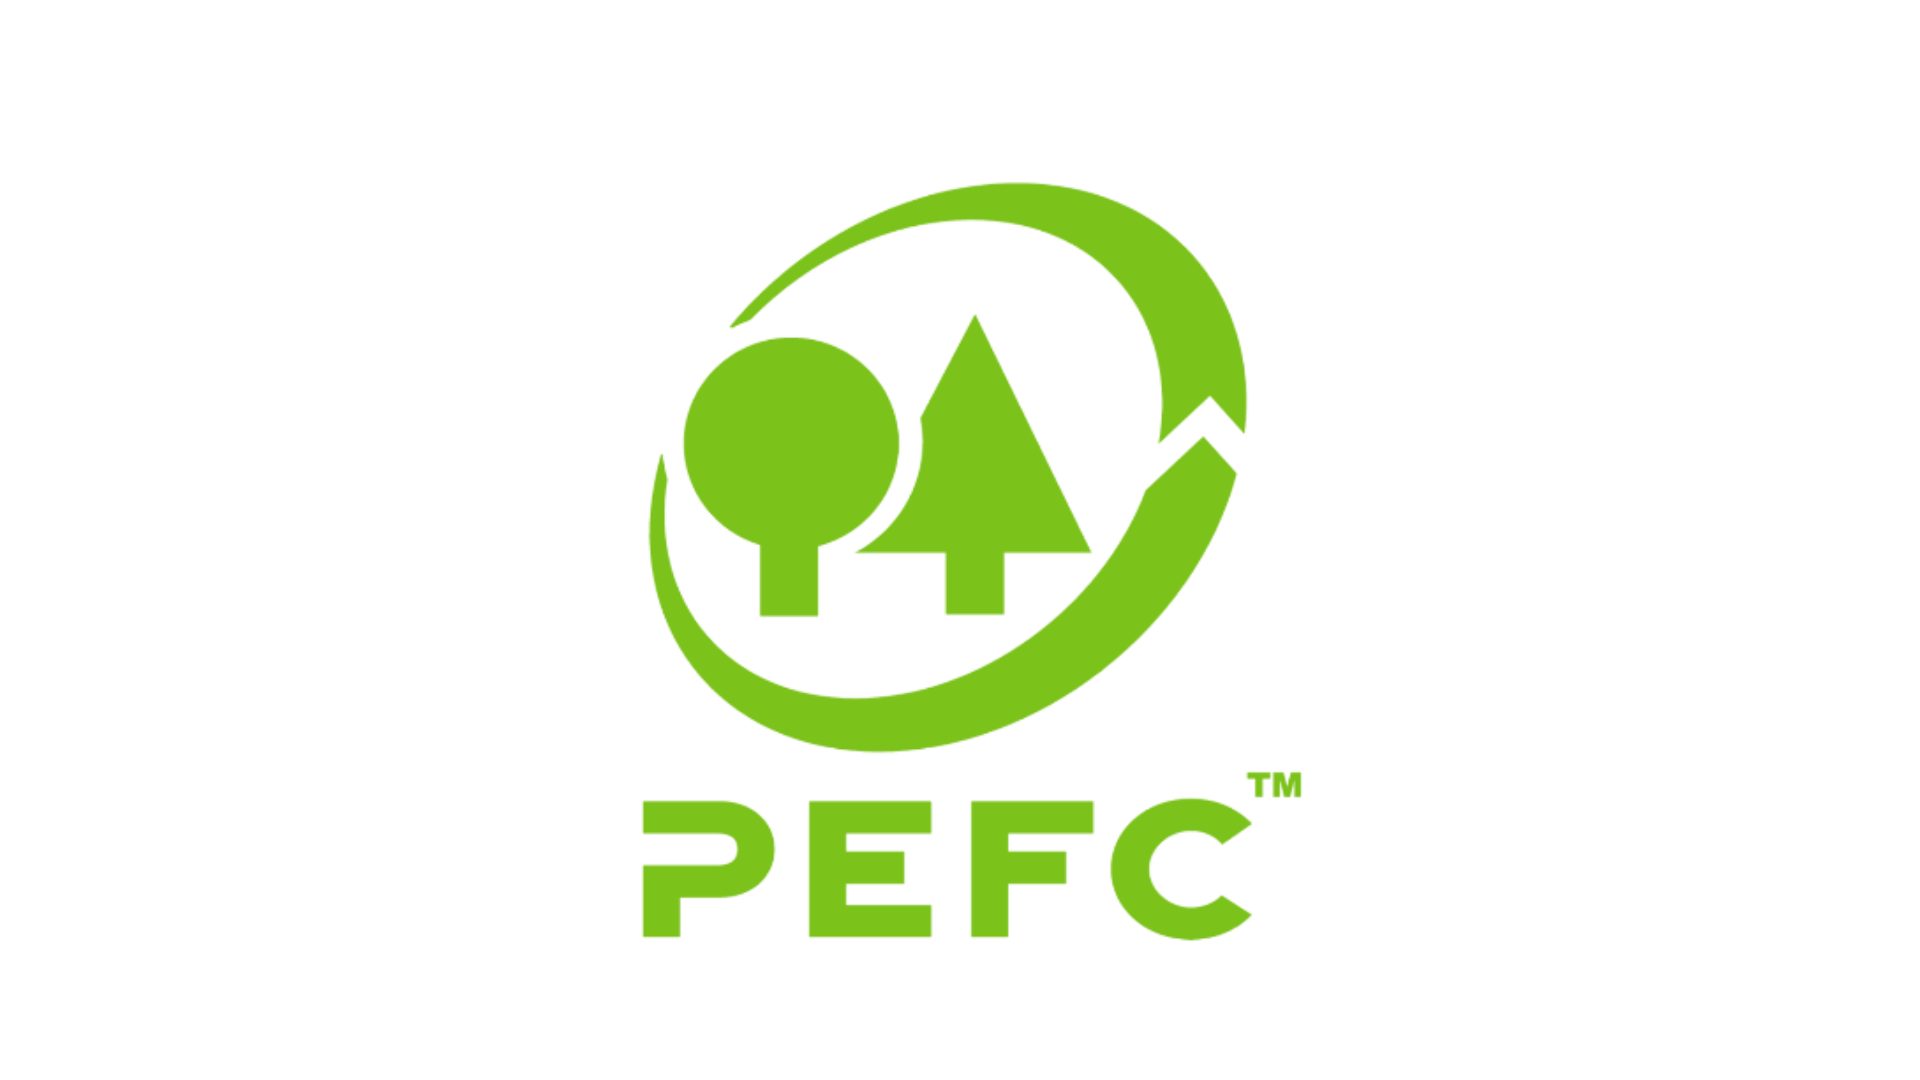 Logotyp för PEFC - Programme for the Endorsement of Forest Certification ™